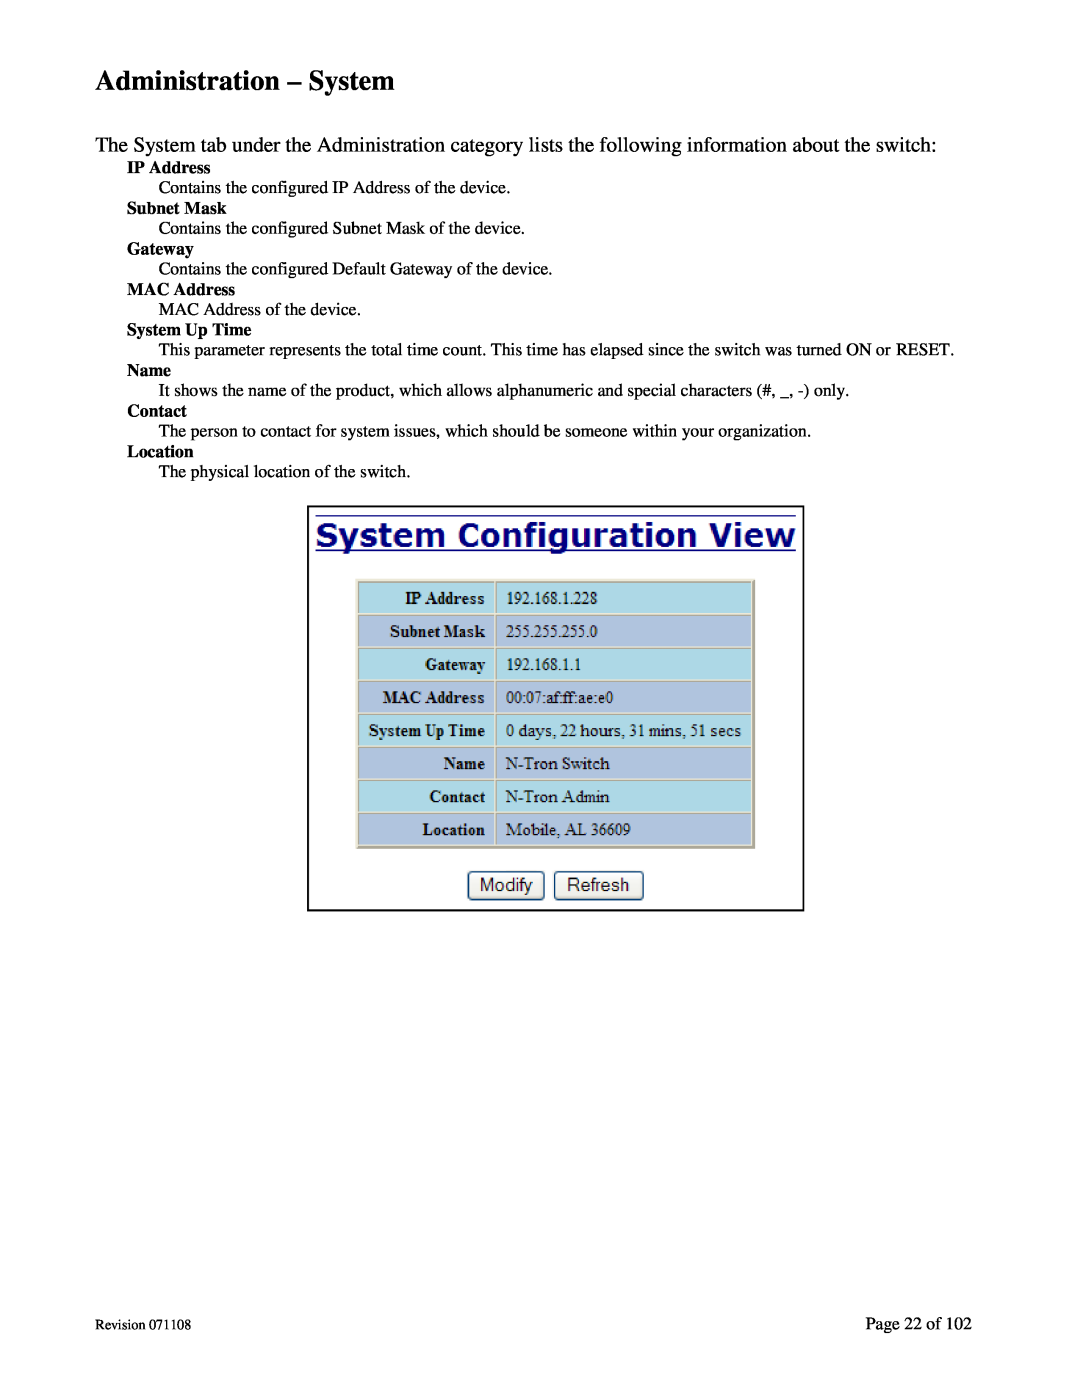 N-Tron 708M12 Administration - System, IP Address, Subnet Mask, Gateway, MAC Address, System Up Time, Name, Contact 